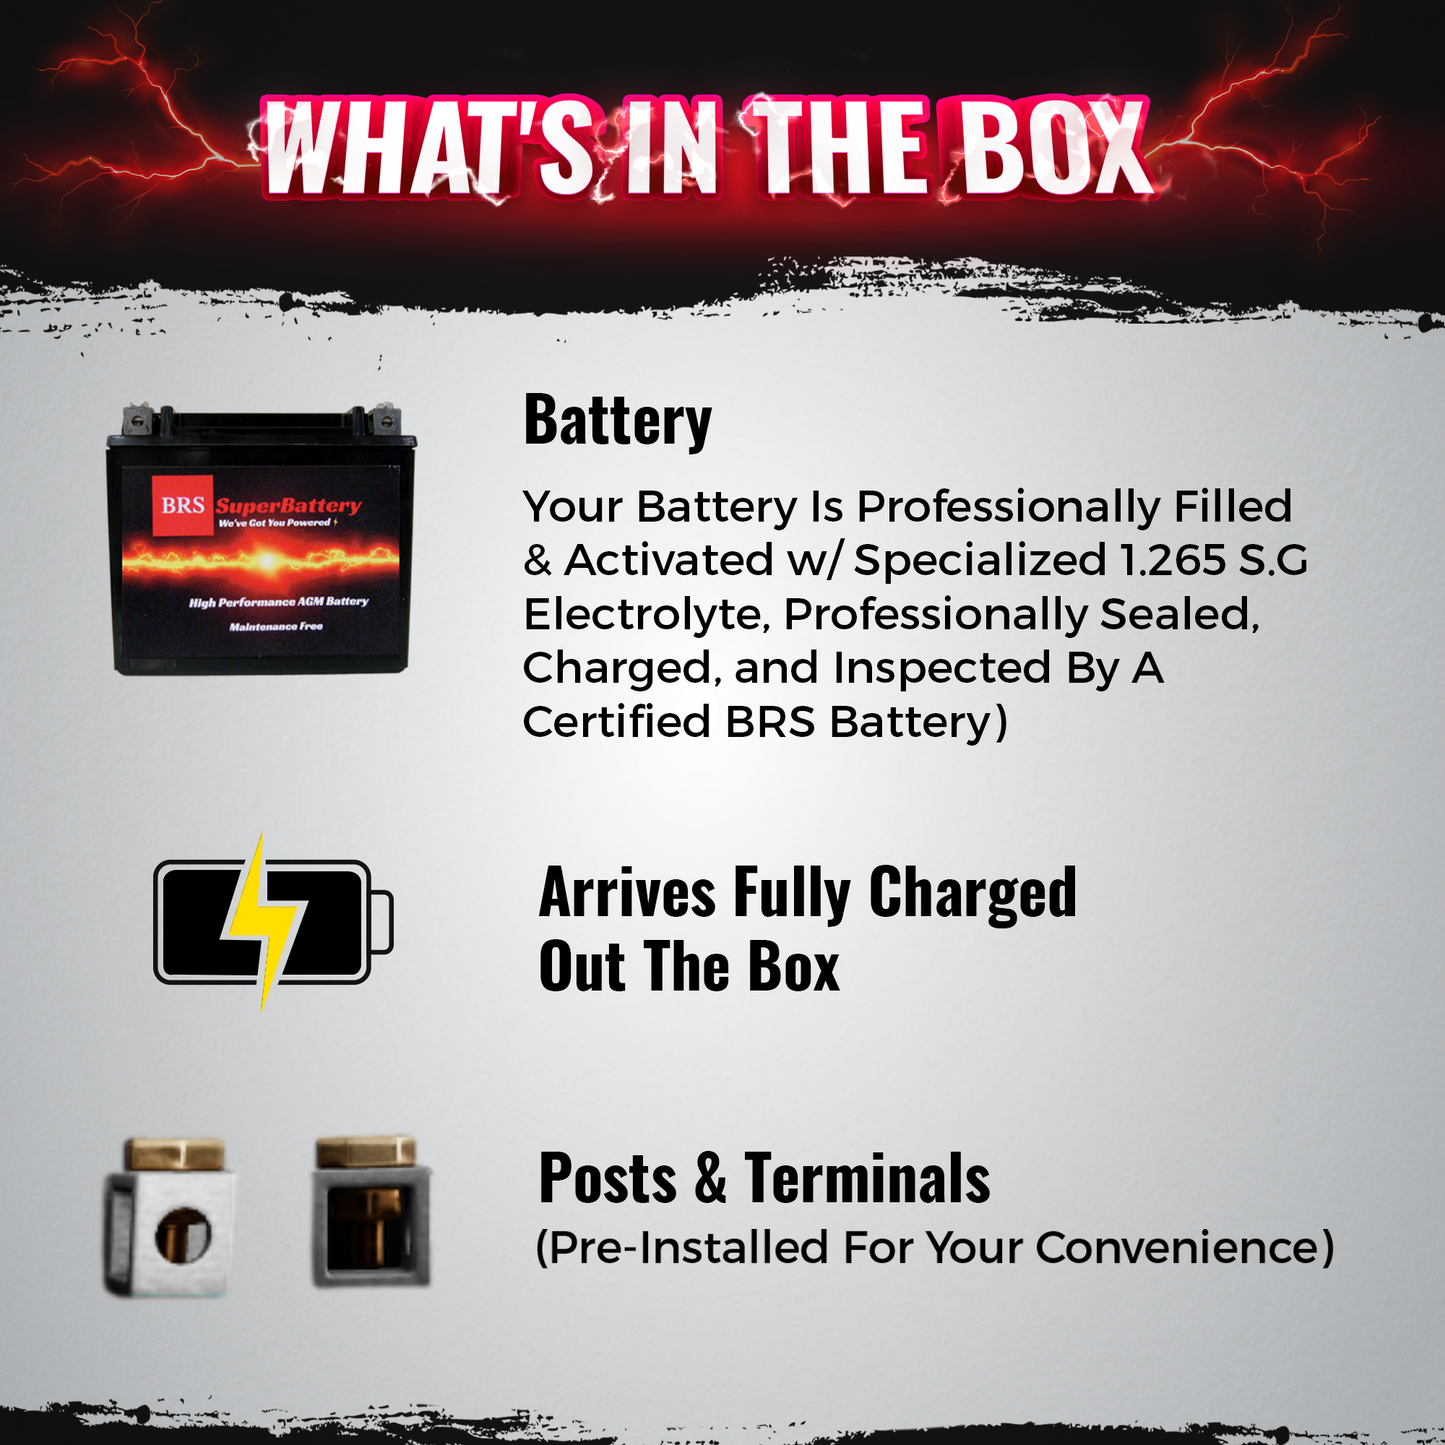 BRS5L-BS 12v High Performance Sealed AGM PowerSport 2 Year Battery - BRS Super Battery